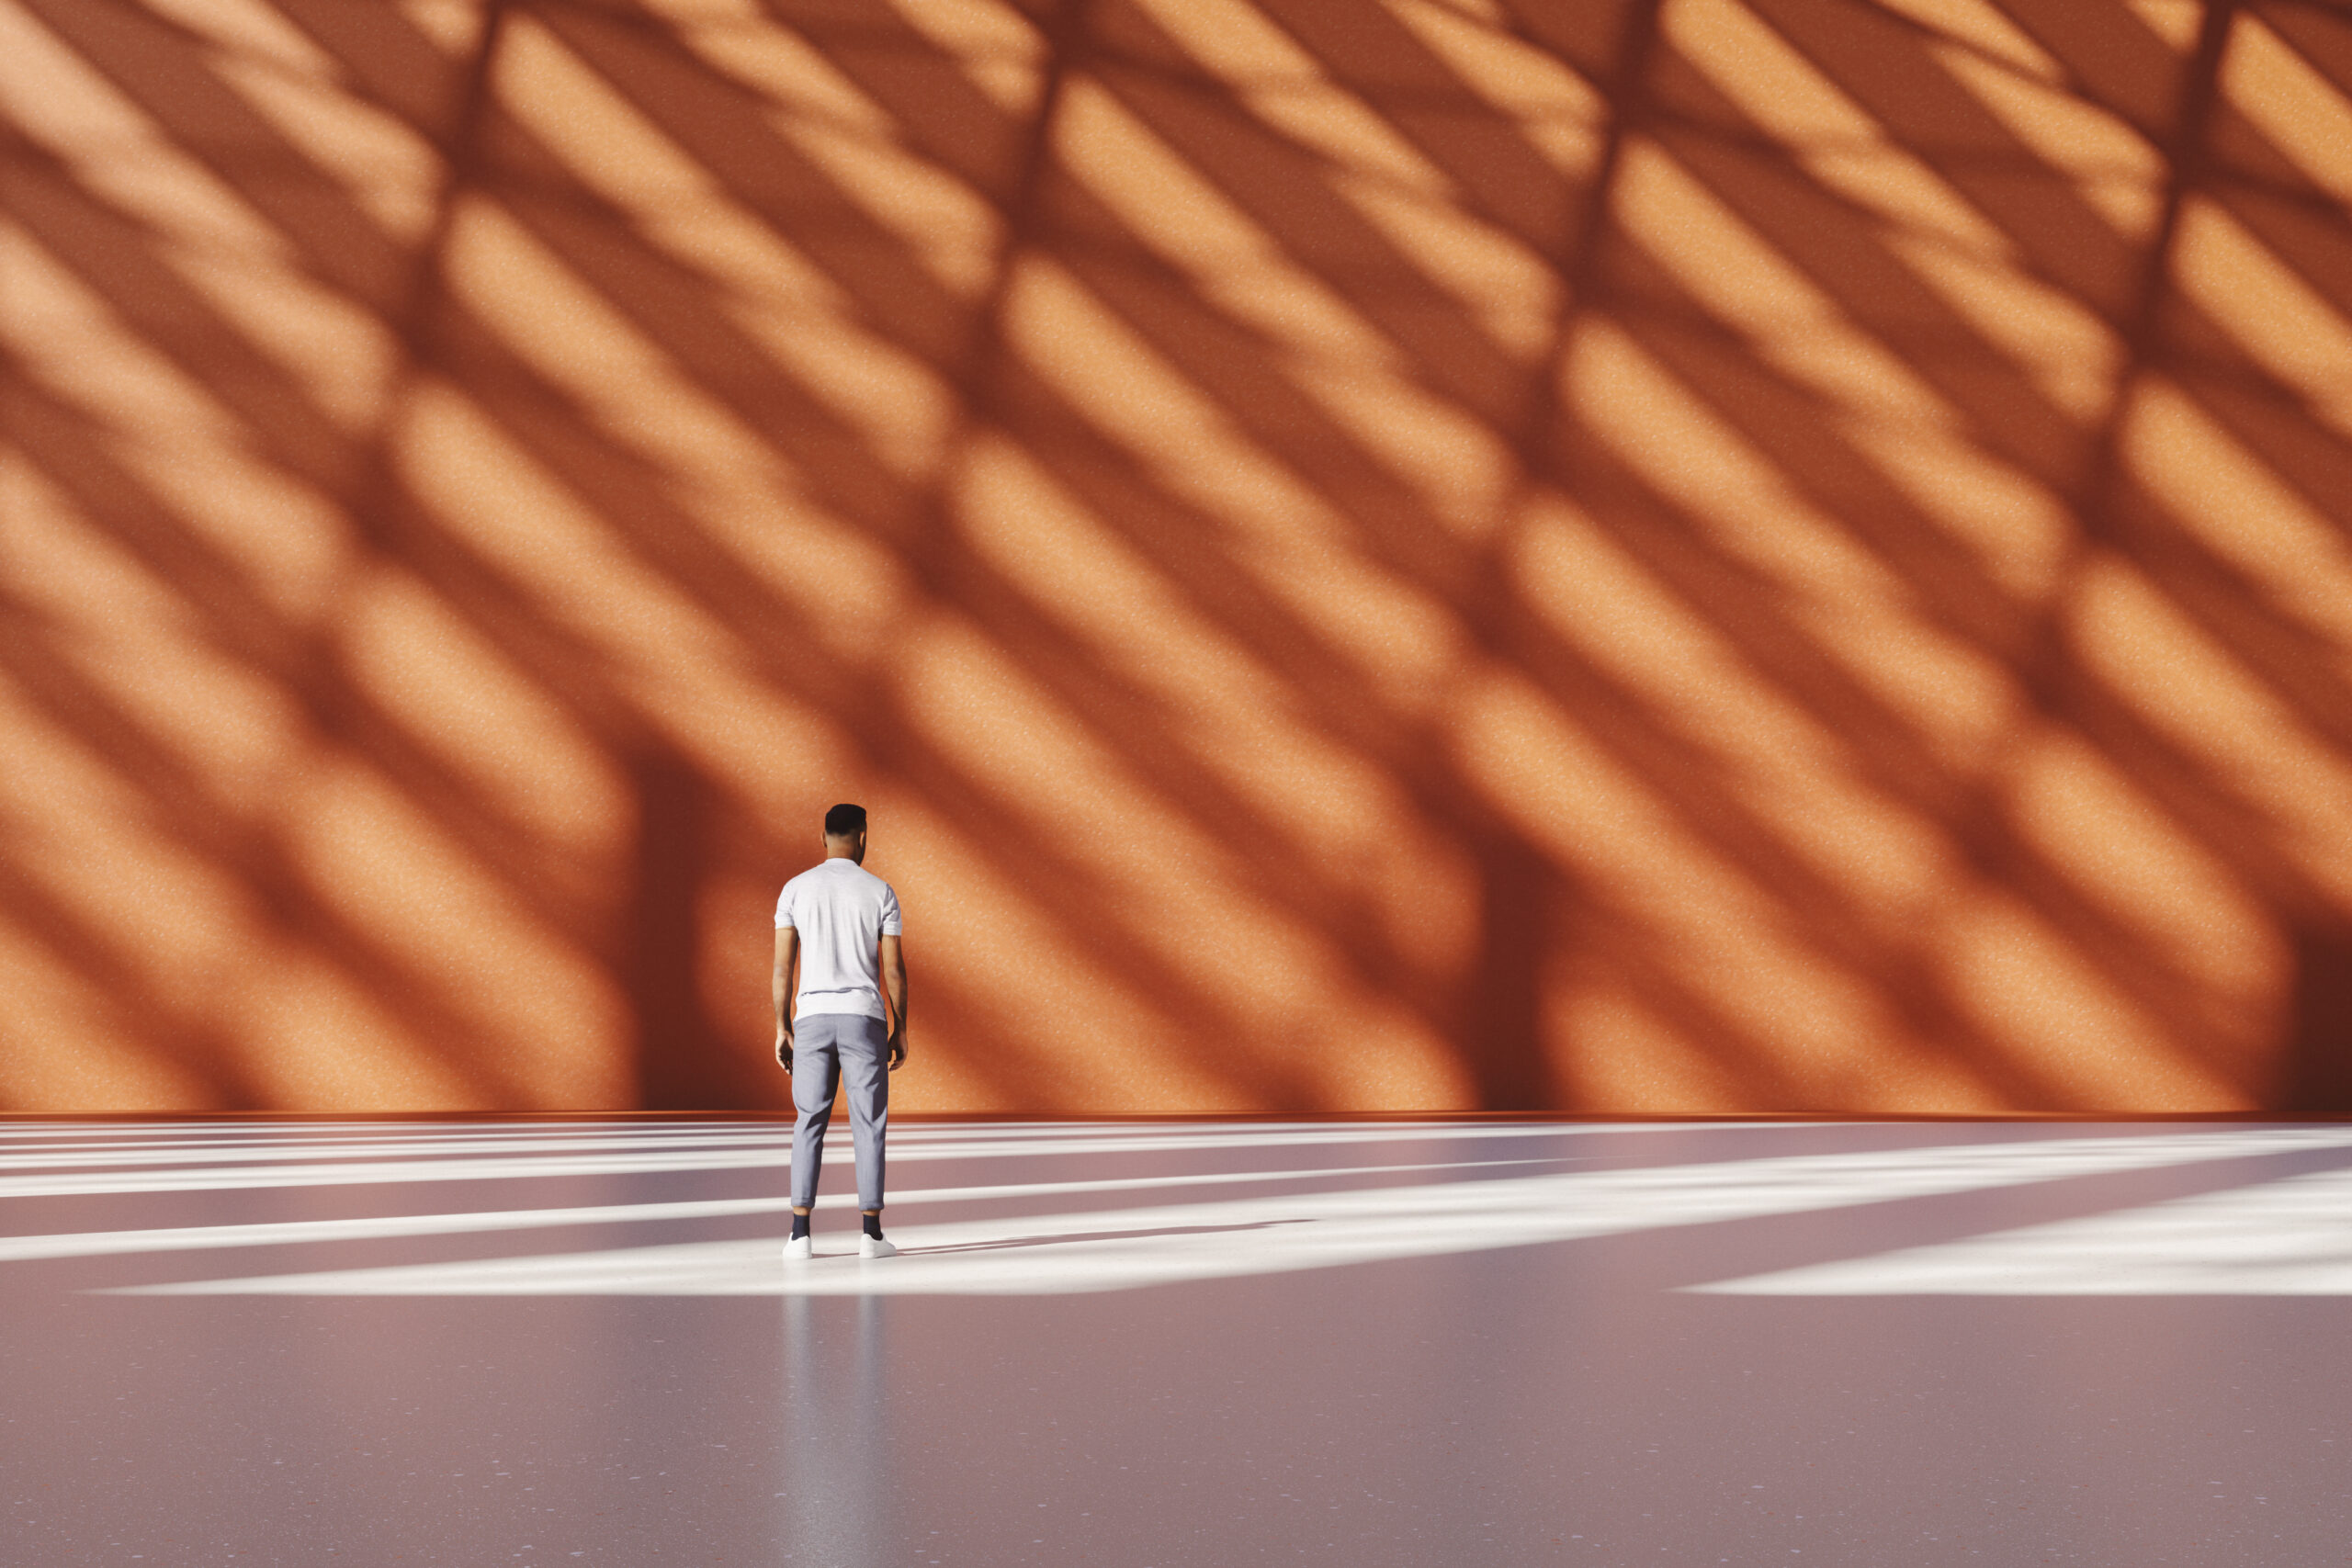 Artistic shot of a man standing in front of an orange wall with striped shadows.